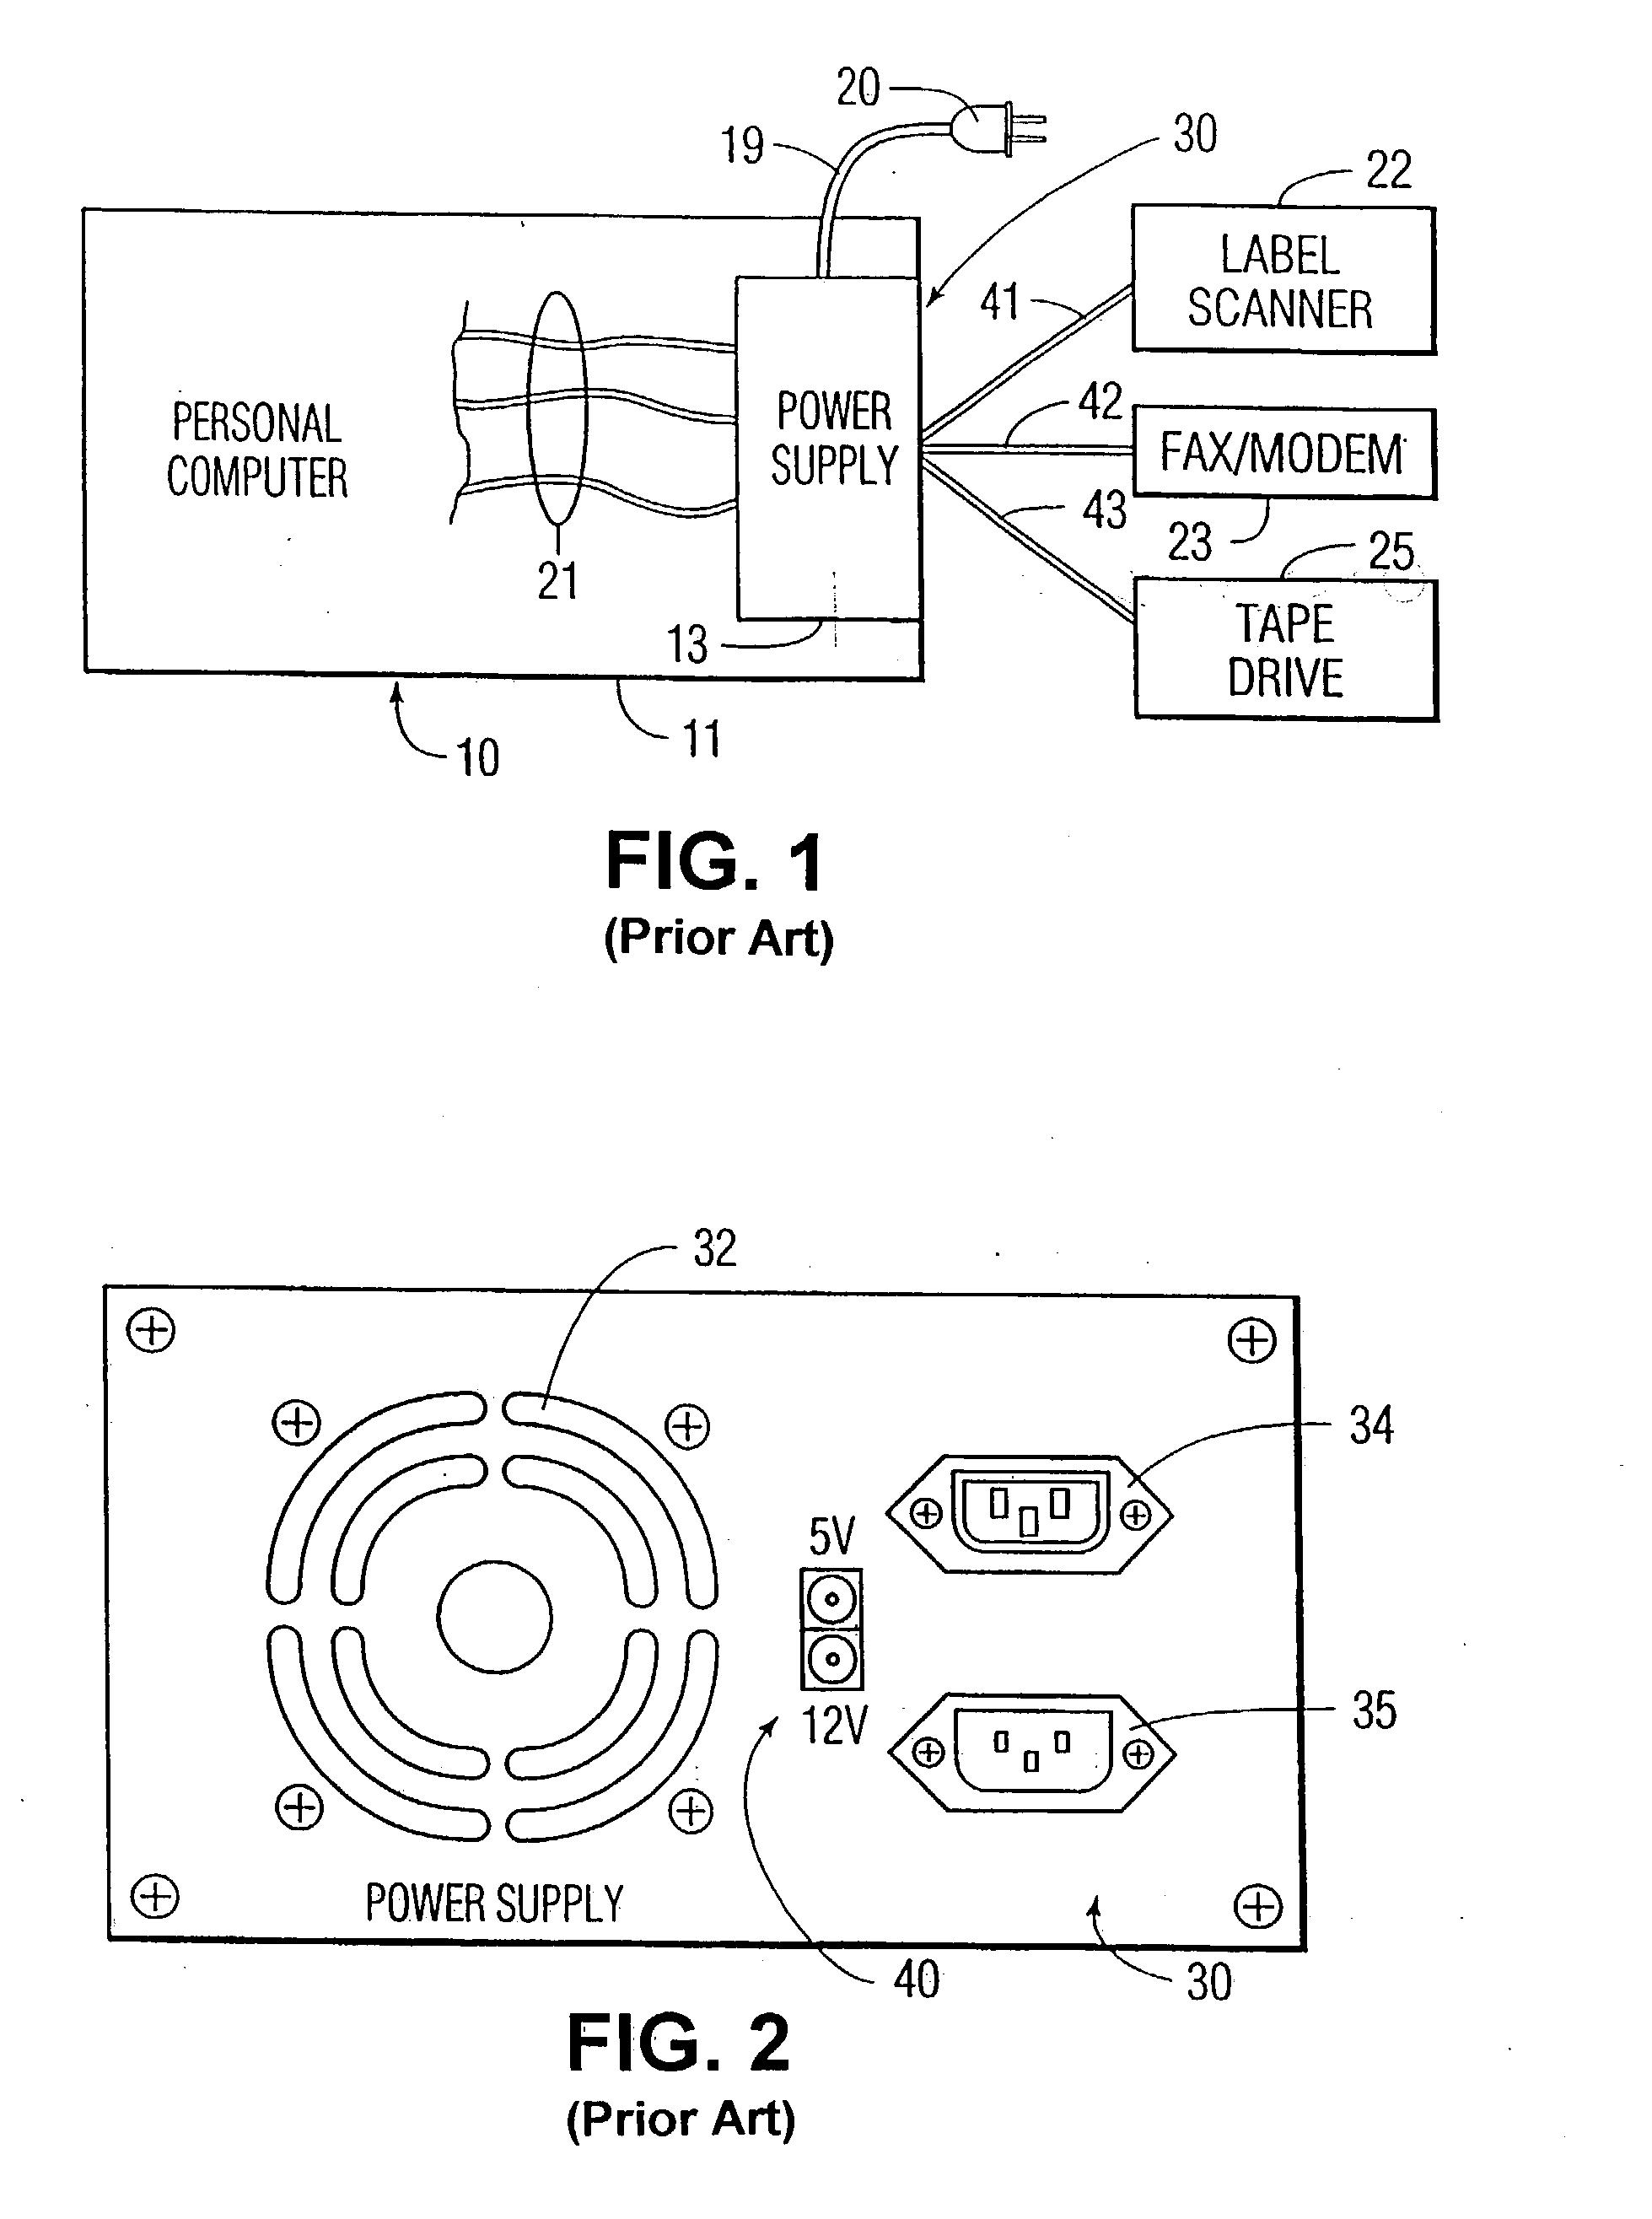 Automatic voltage selection in a DC power distribution apparatus